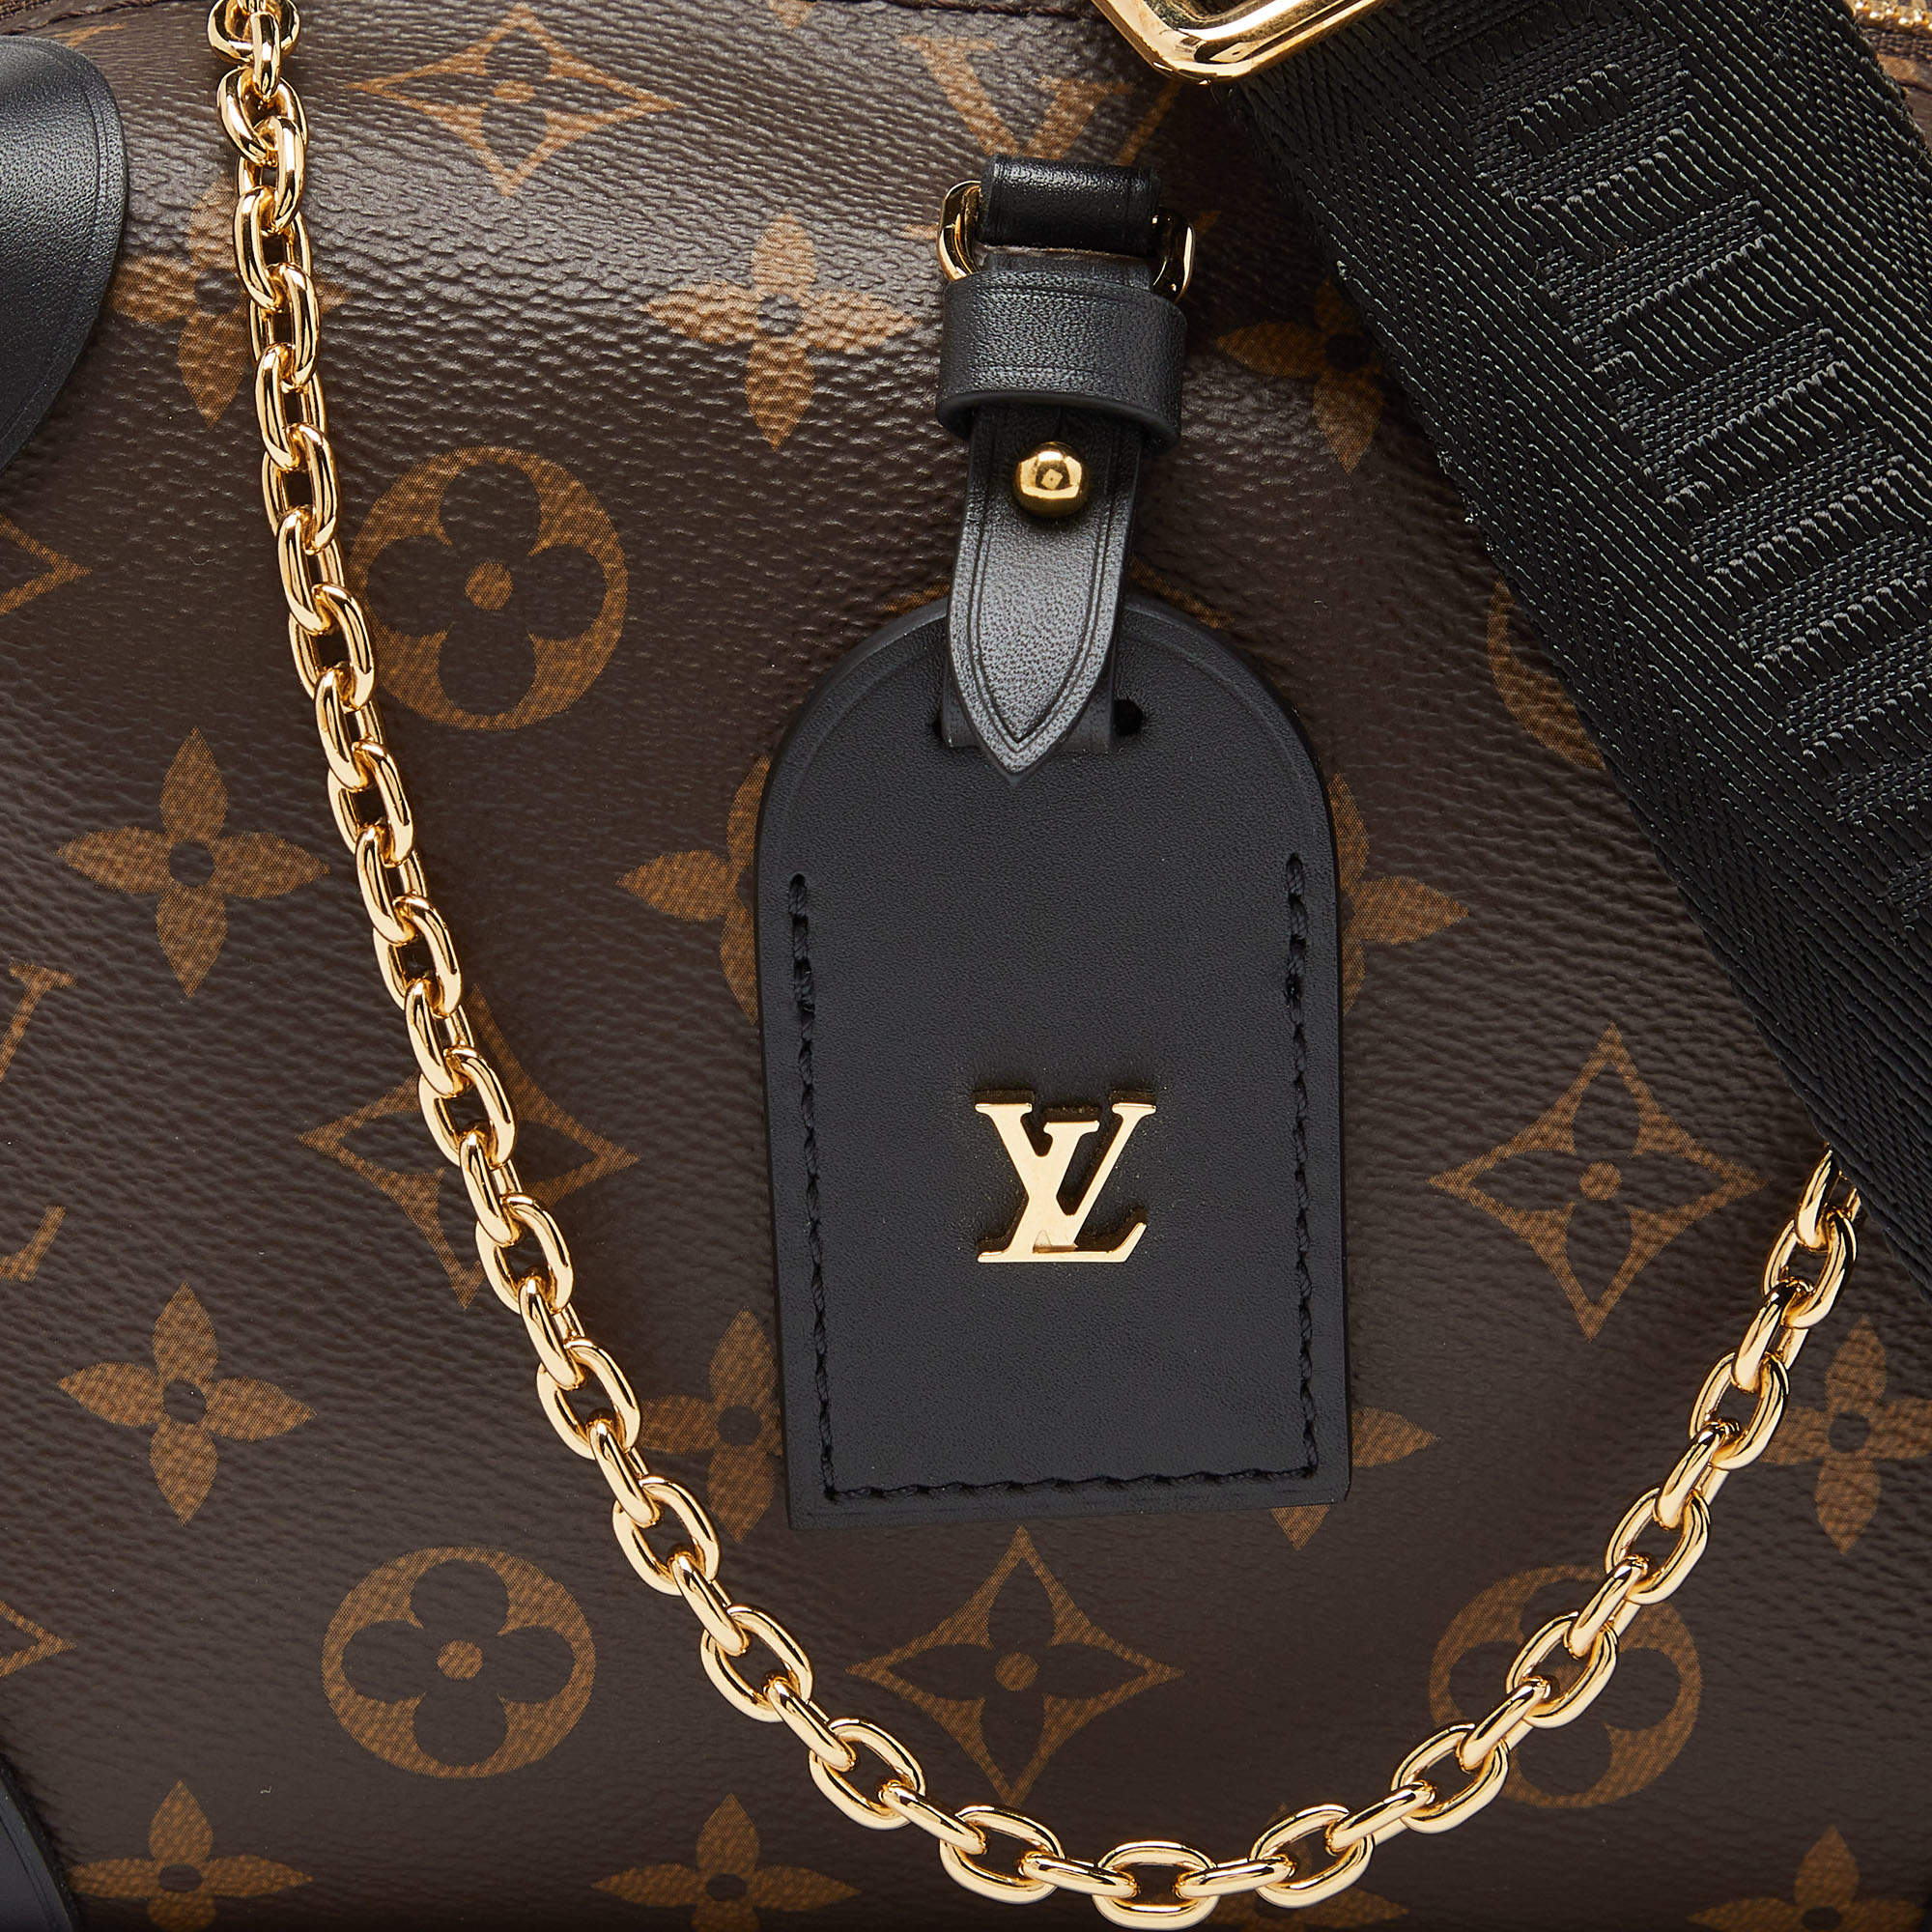 Louis Vuitton Coated Canvas and Leather Petite Malle Souple Bag